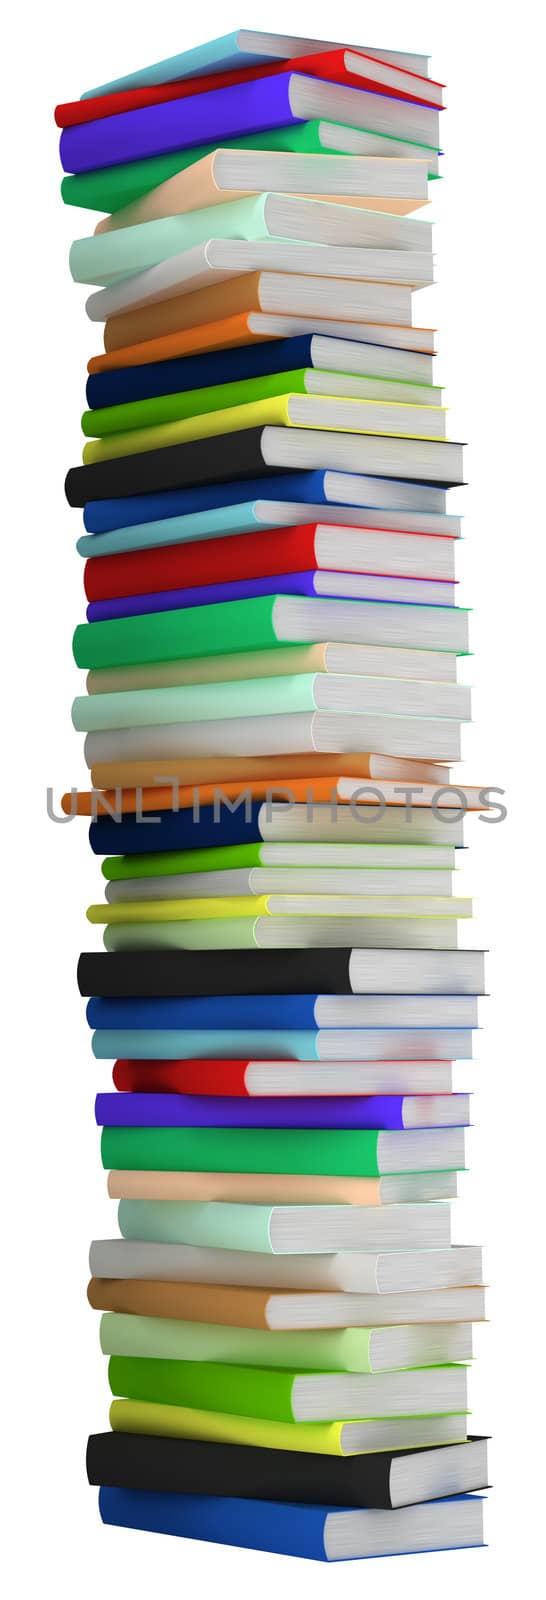 Education and wisdom. Tall heap of hardcovered books by Arsgera